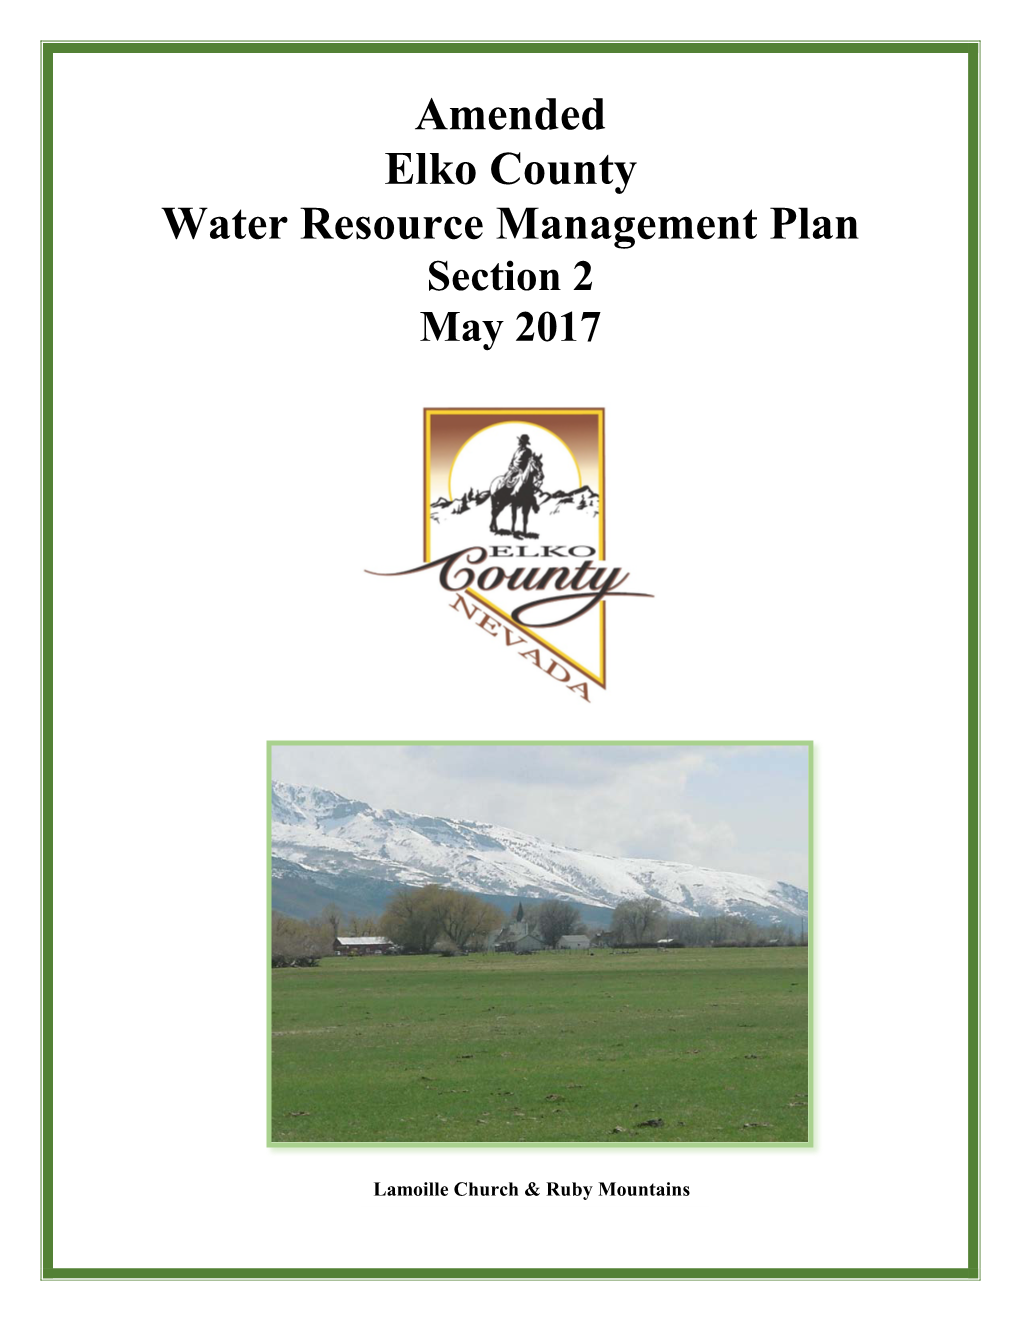 Amended Elko County Water Resource Management Plan Section 2 May 2017